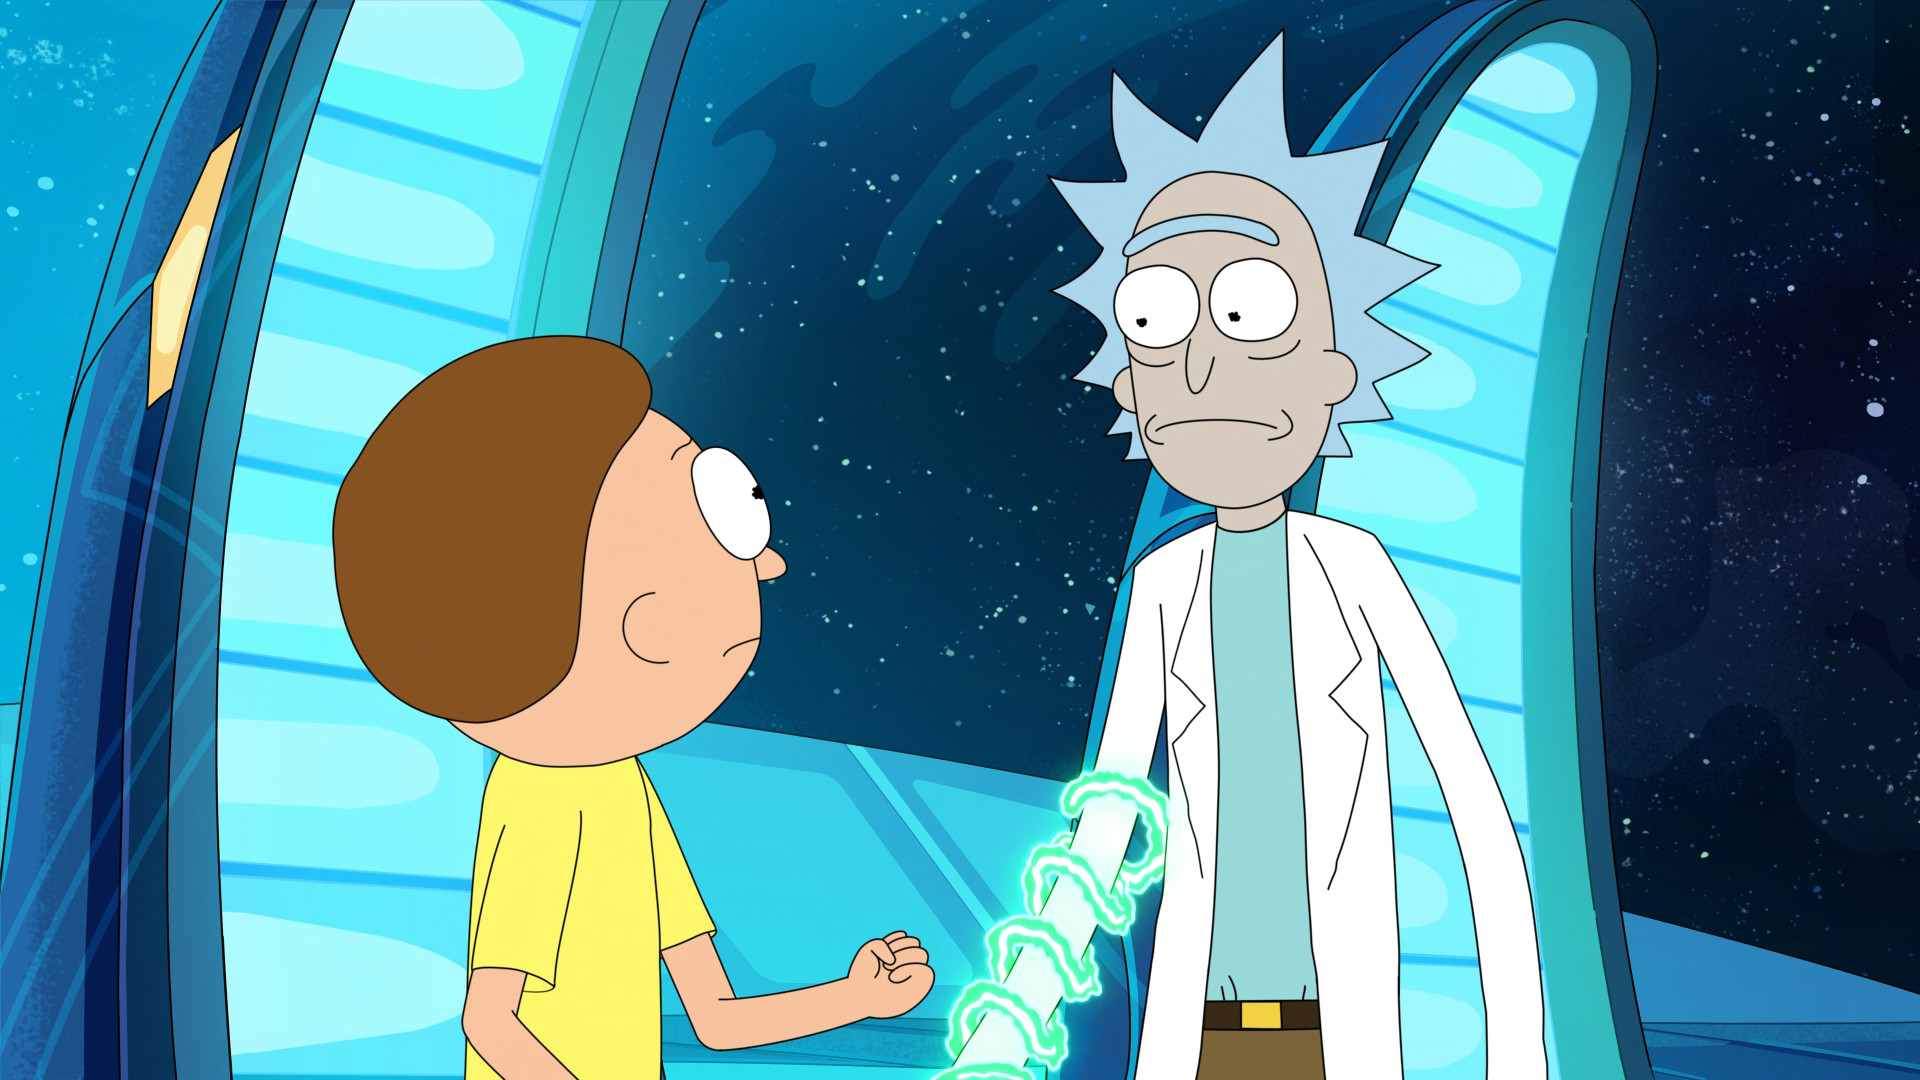 410+ Rick and Morty HD Wallpapers and Backgrounds